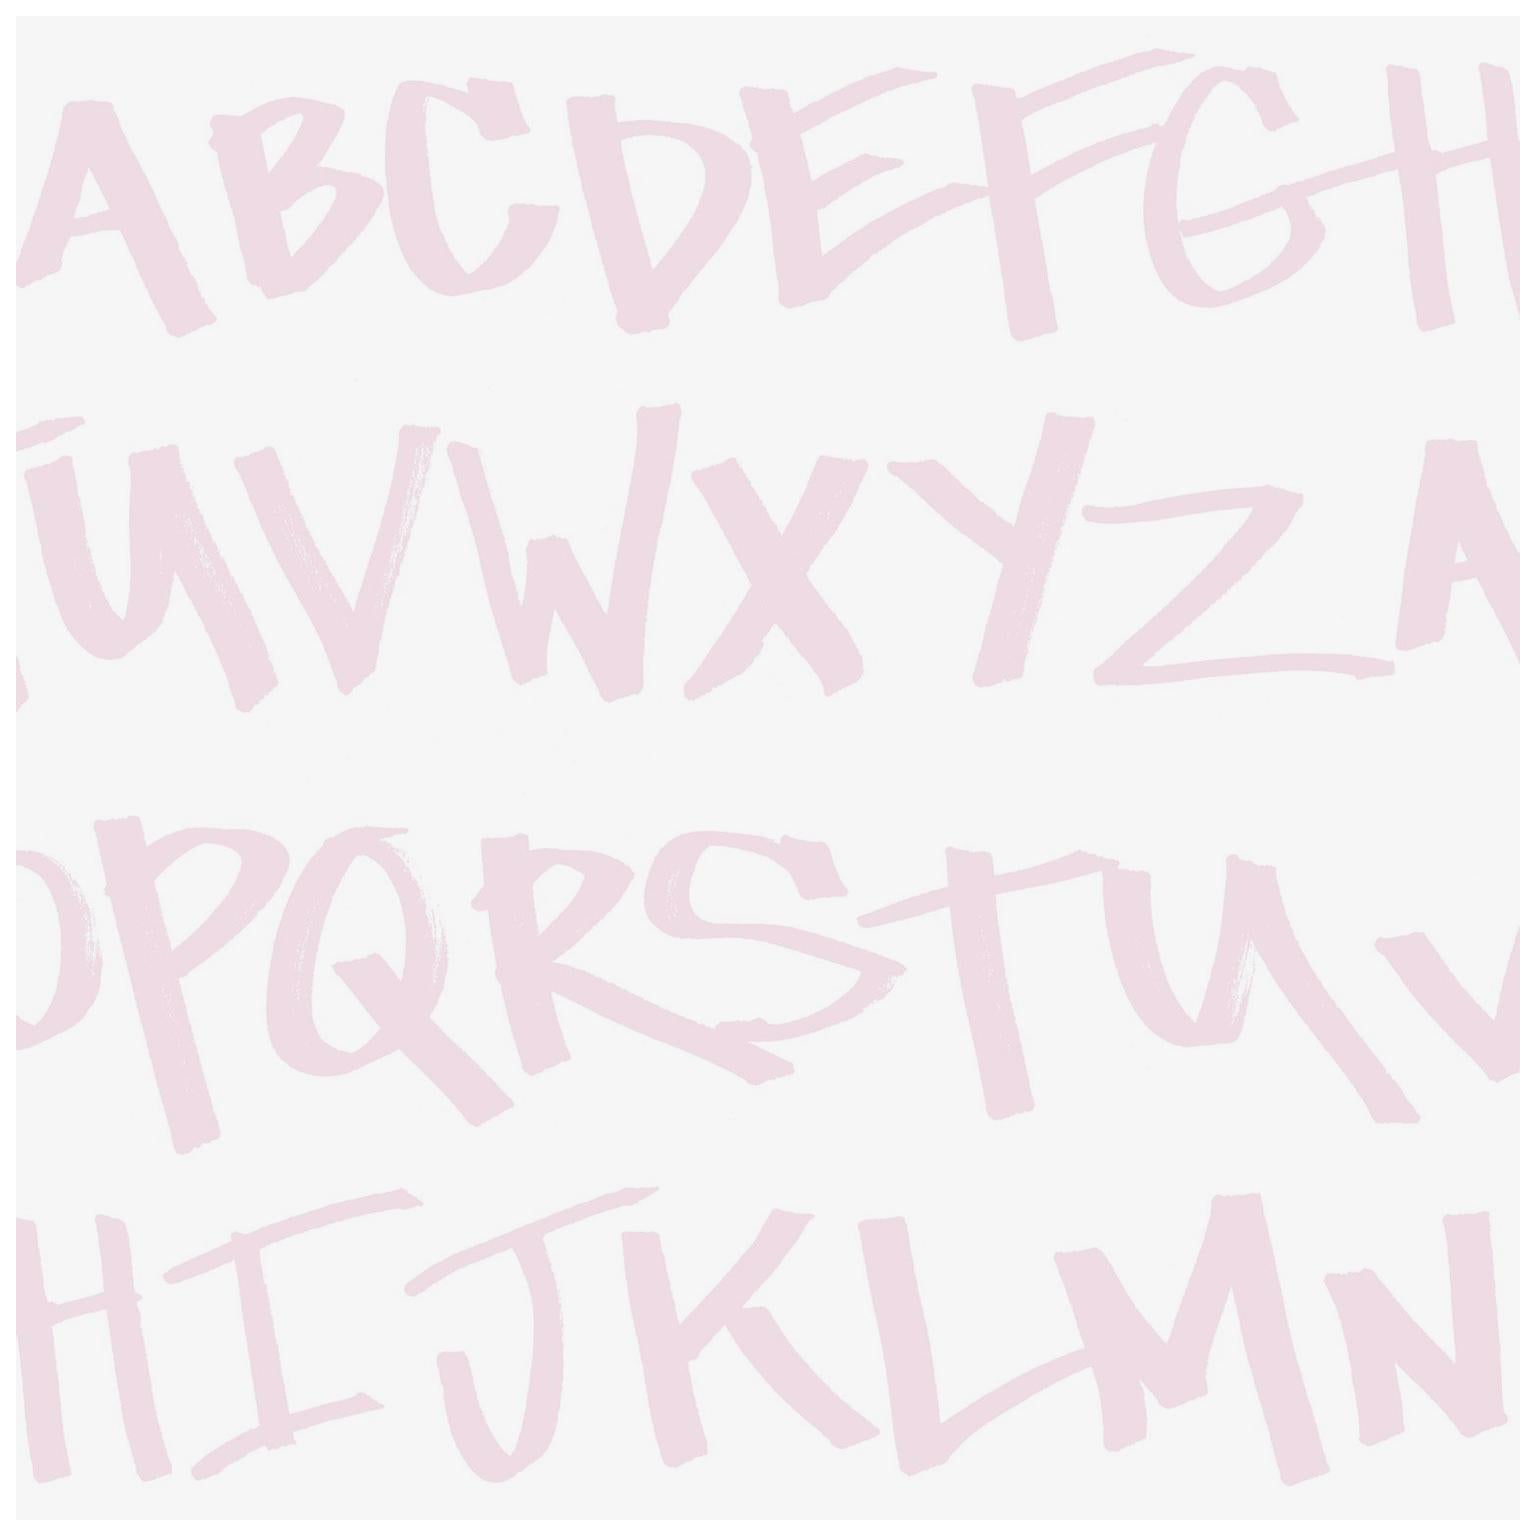 NYC Alphabet in Rose Colorway on Smooth Wallpaper For Sale